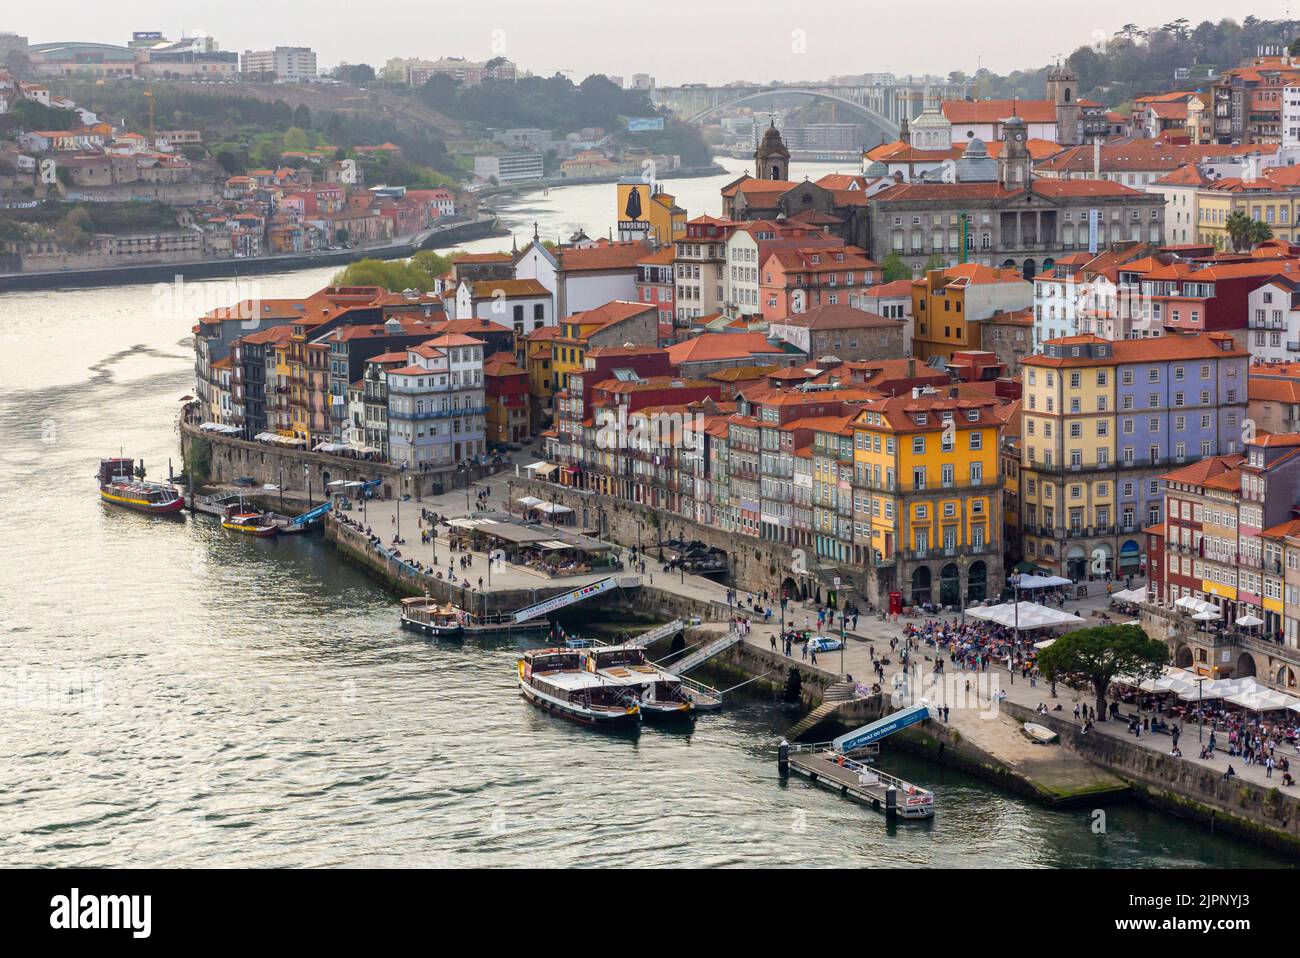 Tourist boats moored on the River Douro in the centre of Porto a major city in northern Portugal. Stock Photo